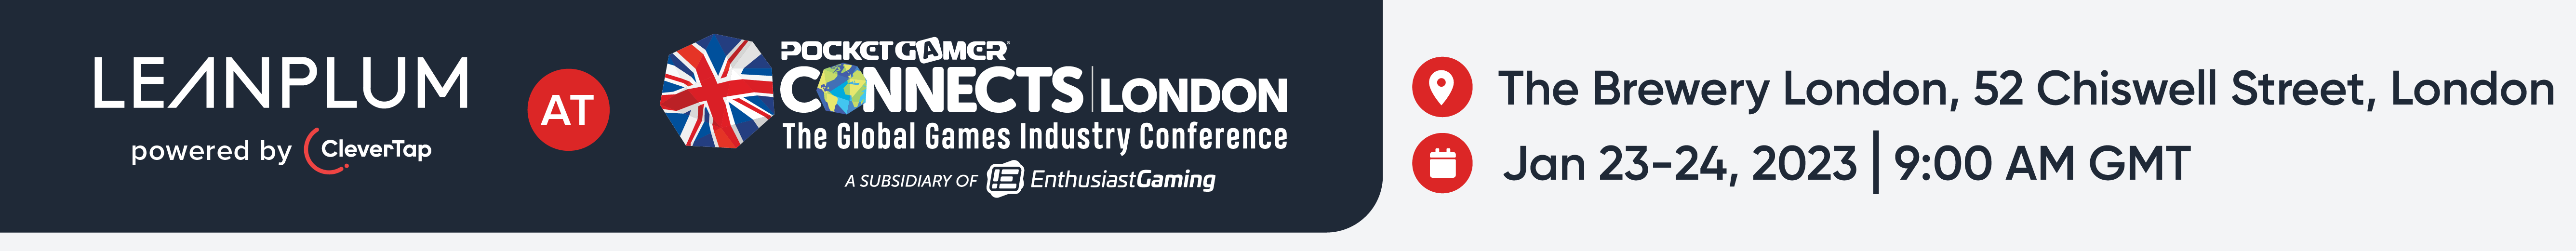 Leanplum is going to PocketGamer Connects London 2023 - The global games industry conference. See you January 23-24 at The Brewery London!